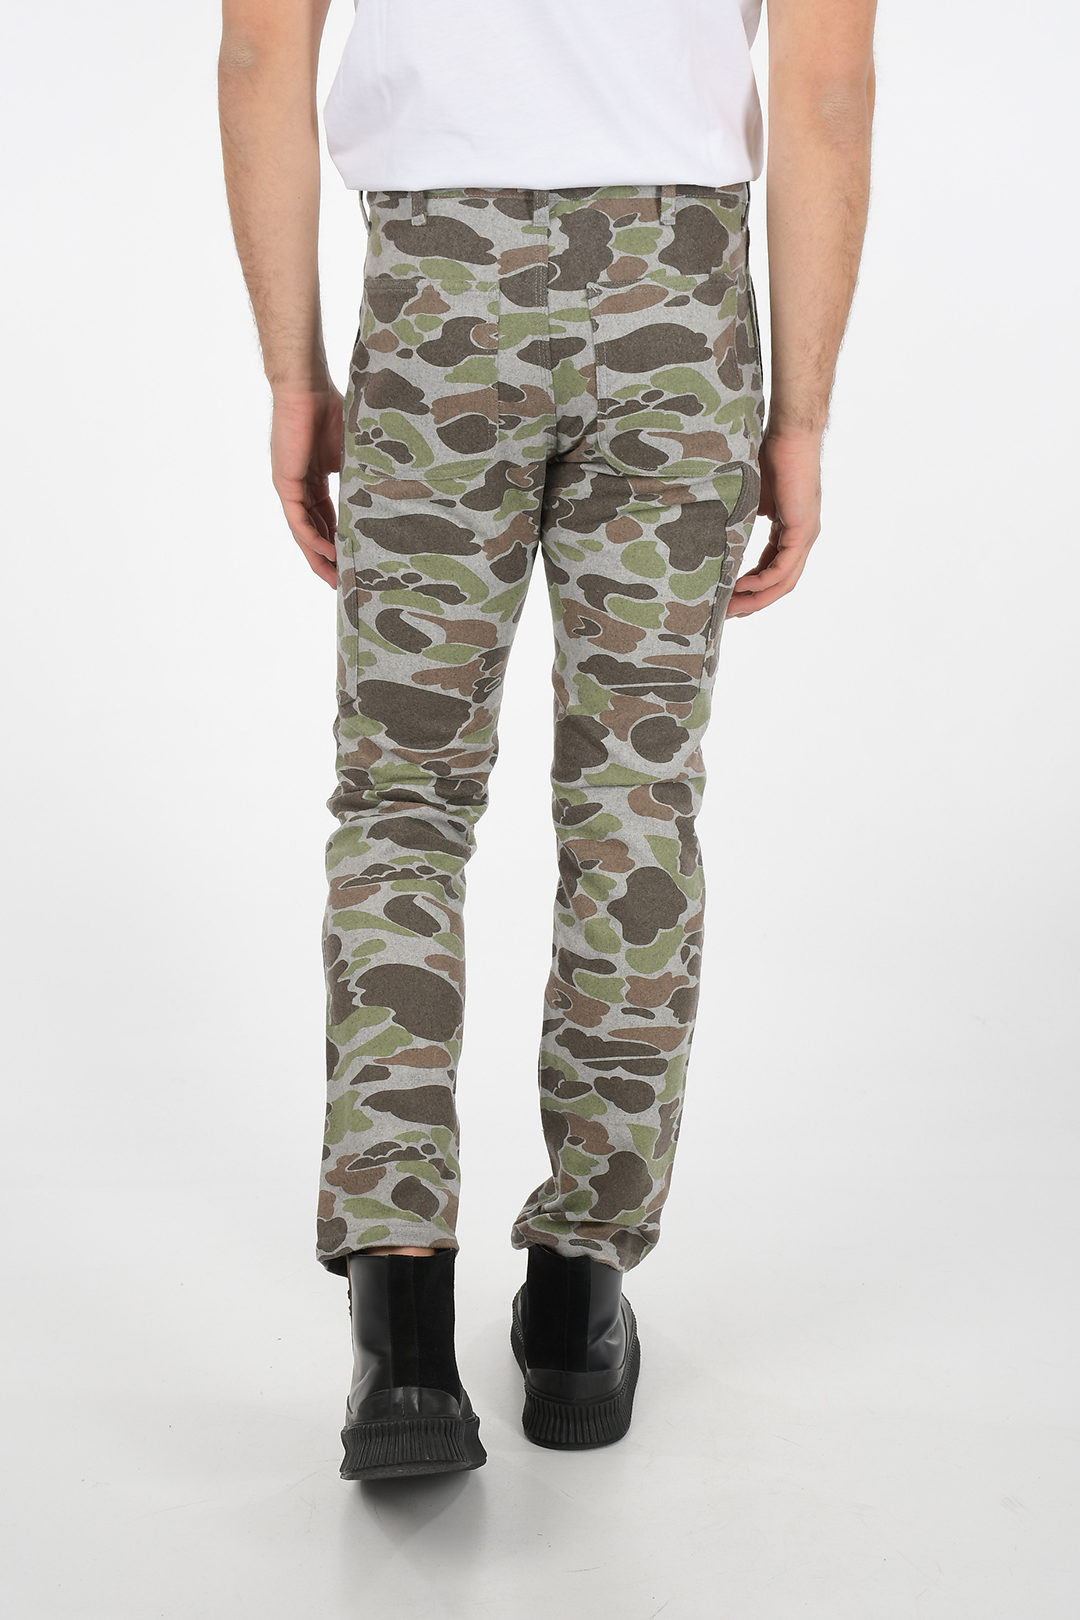 Mens Military Camouflage Camouflage Cargo Pants Mens With Purple Iron Chain  Streetwear Pencil Pant For Hip Hop And Tactical Use T230718 From  Mengyang04, $27.55 | DHgate.Com